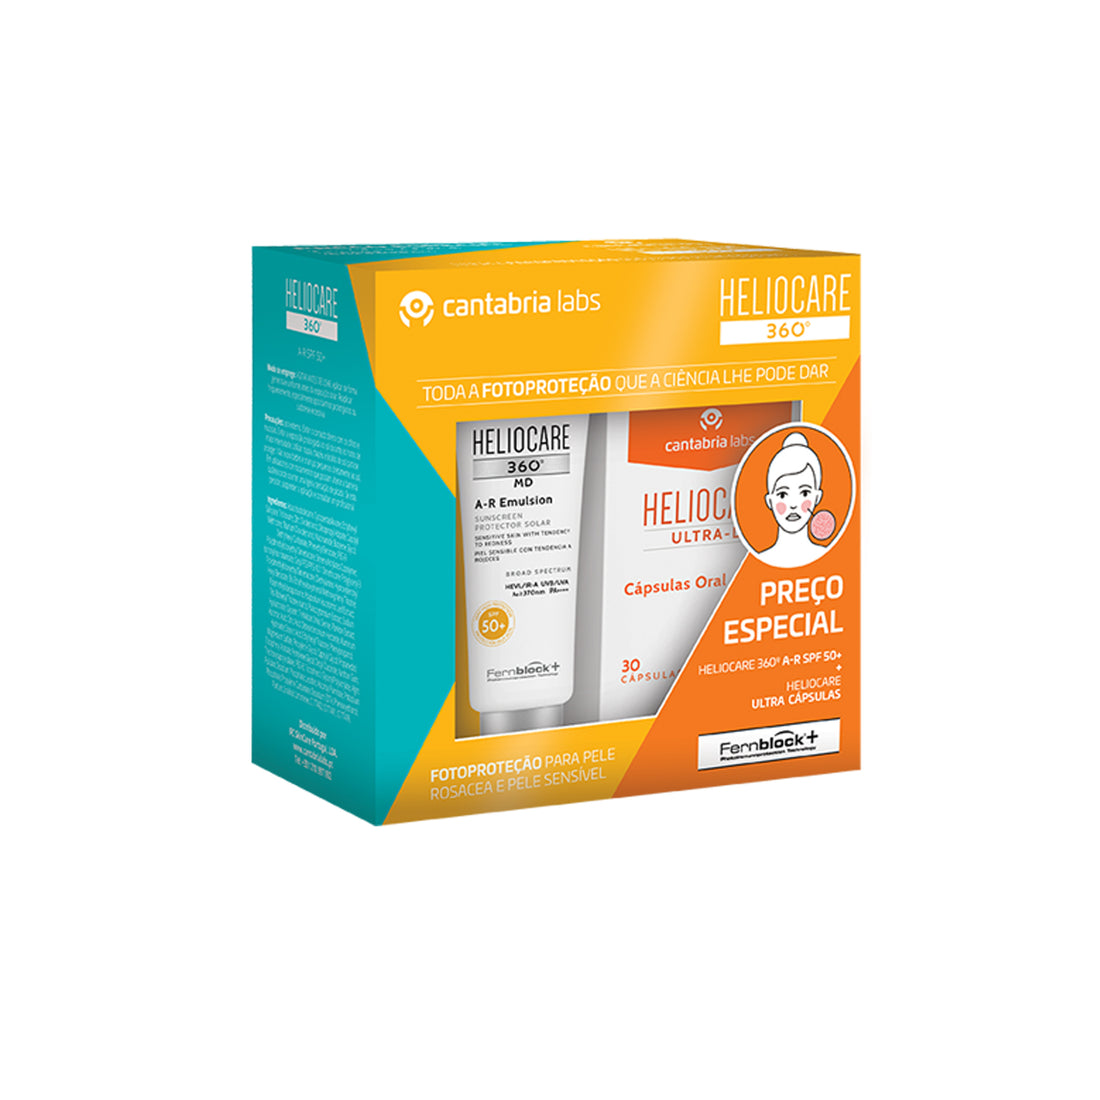 Heliocare Pack 360 MD A-R Emulsion SPF50+ 50ml + Ultra D Sun Capsules x30